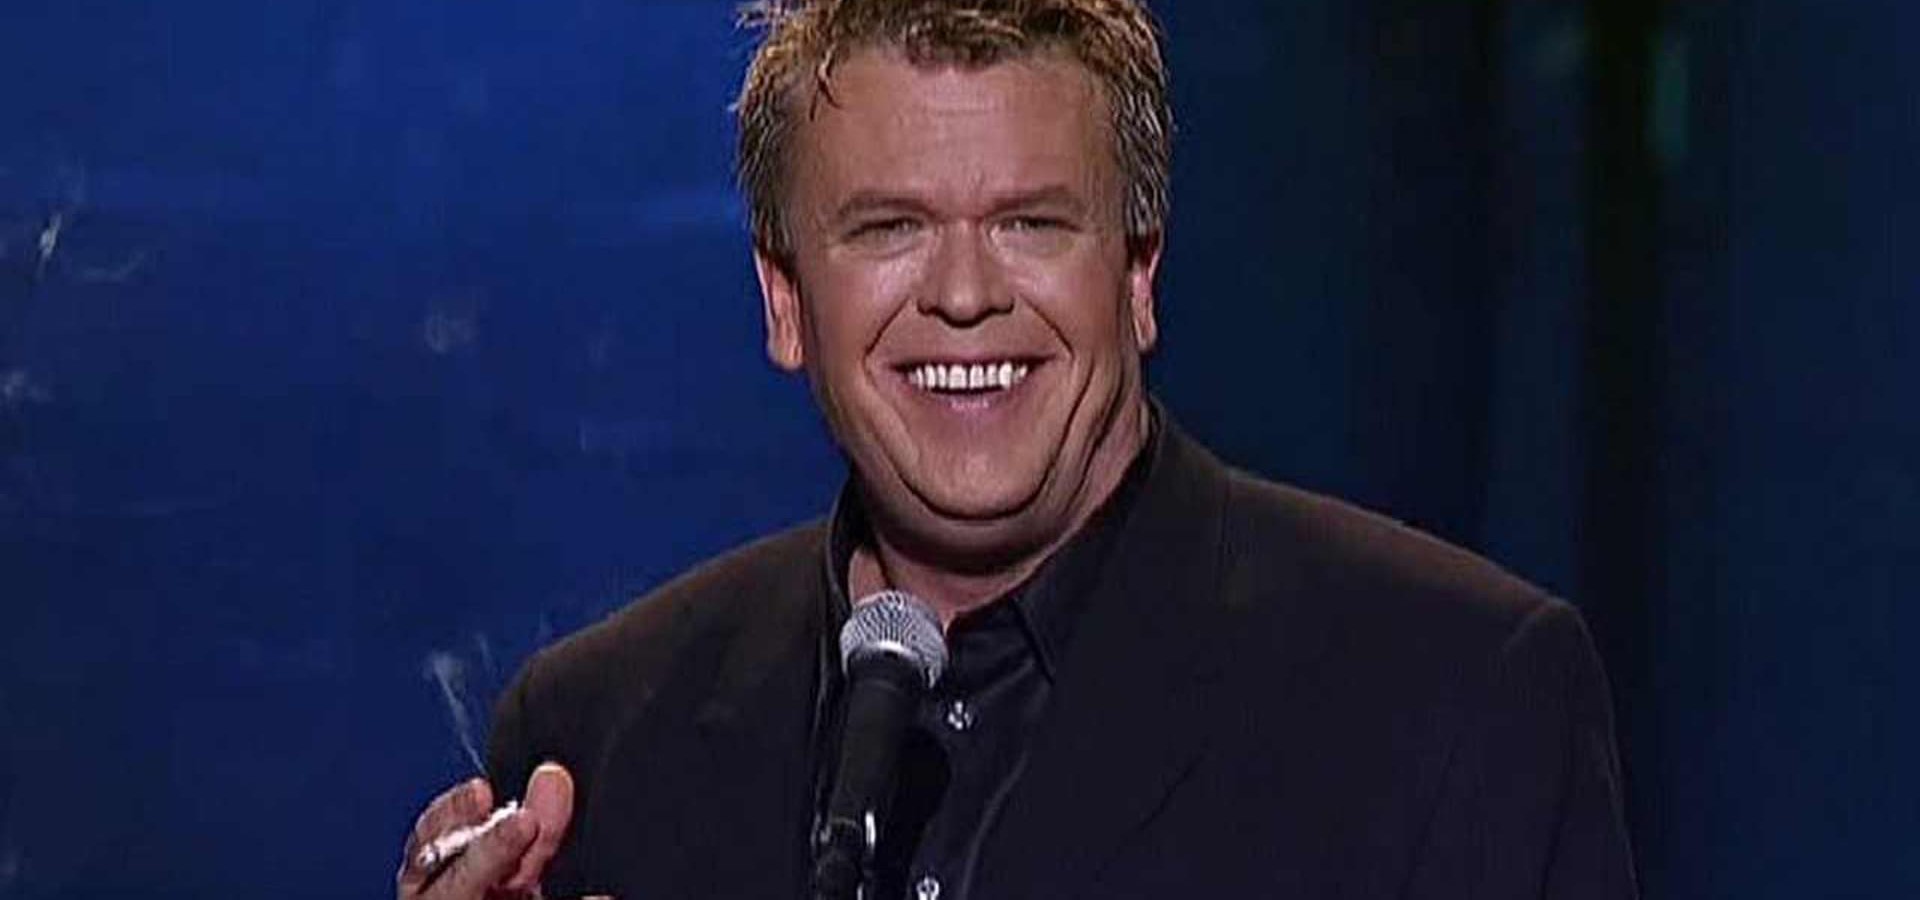 Ron White: They Call Me Tater Salad